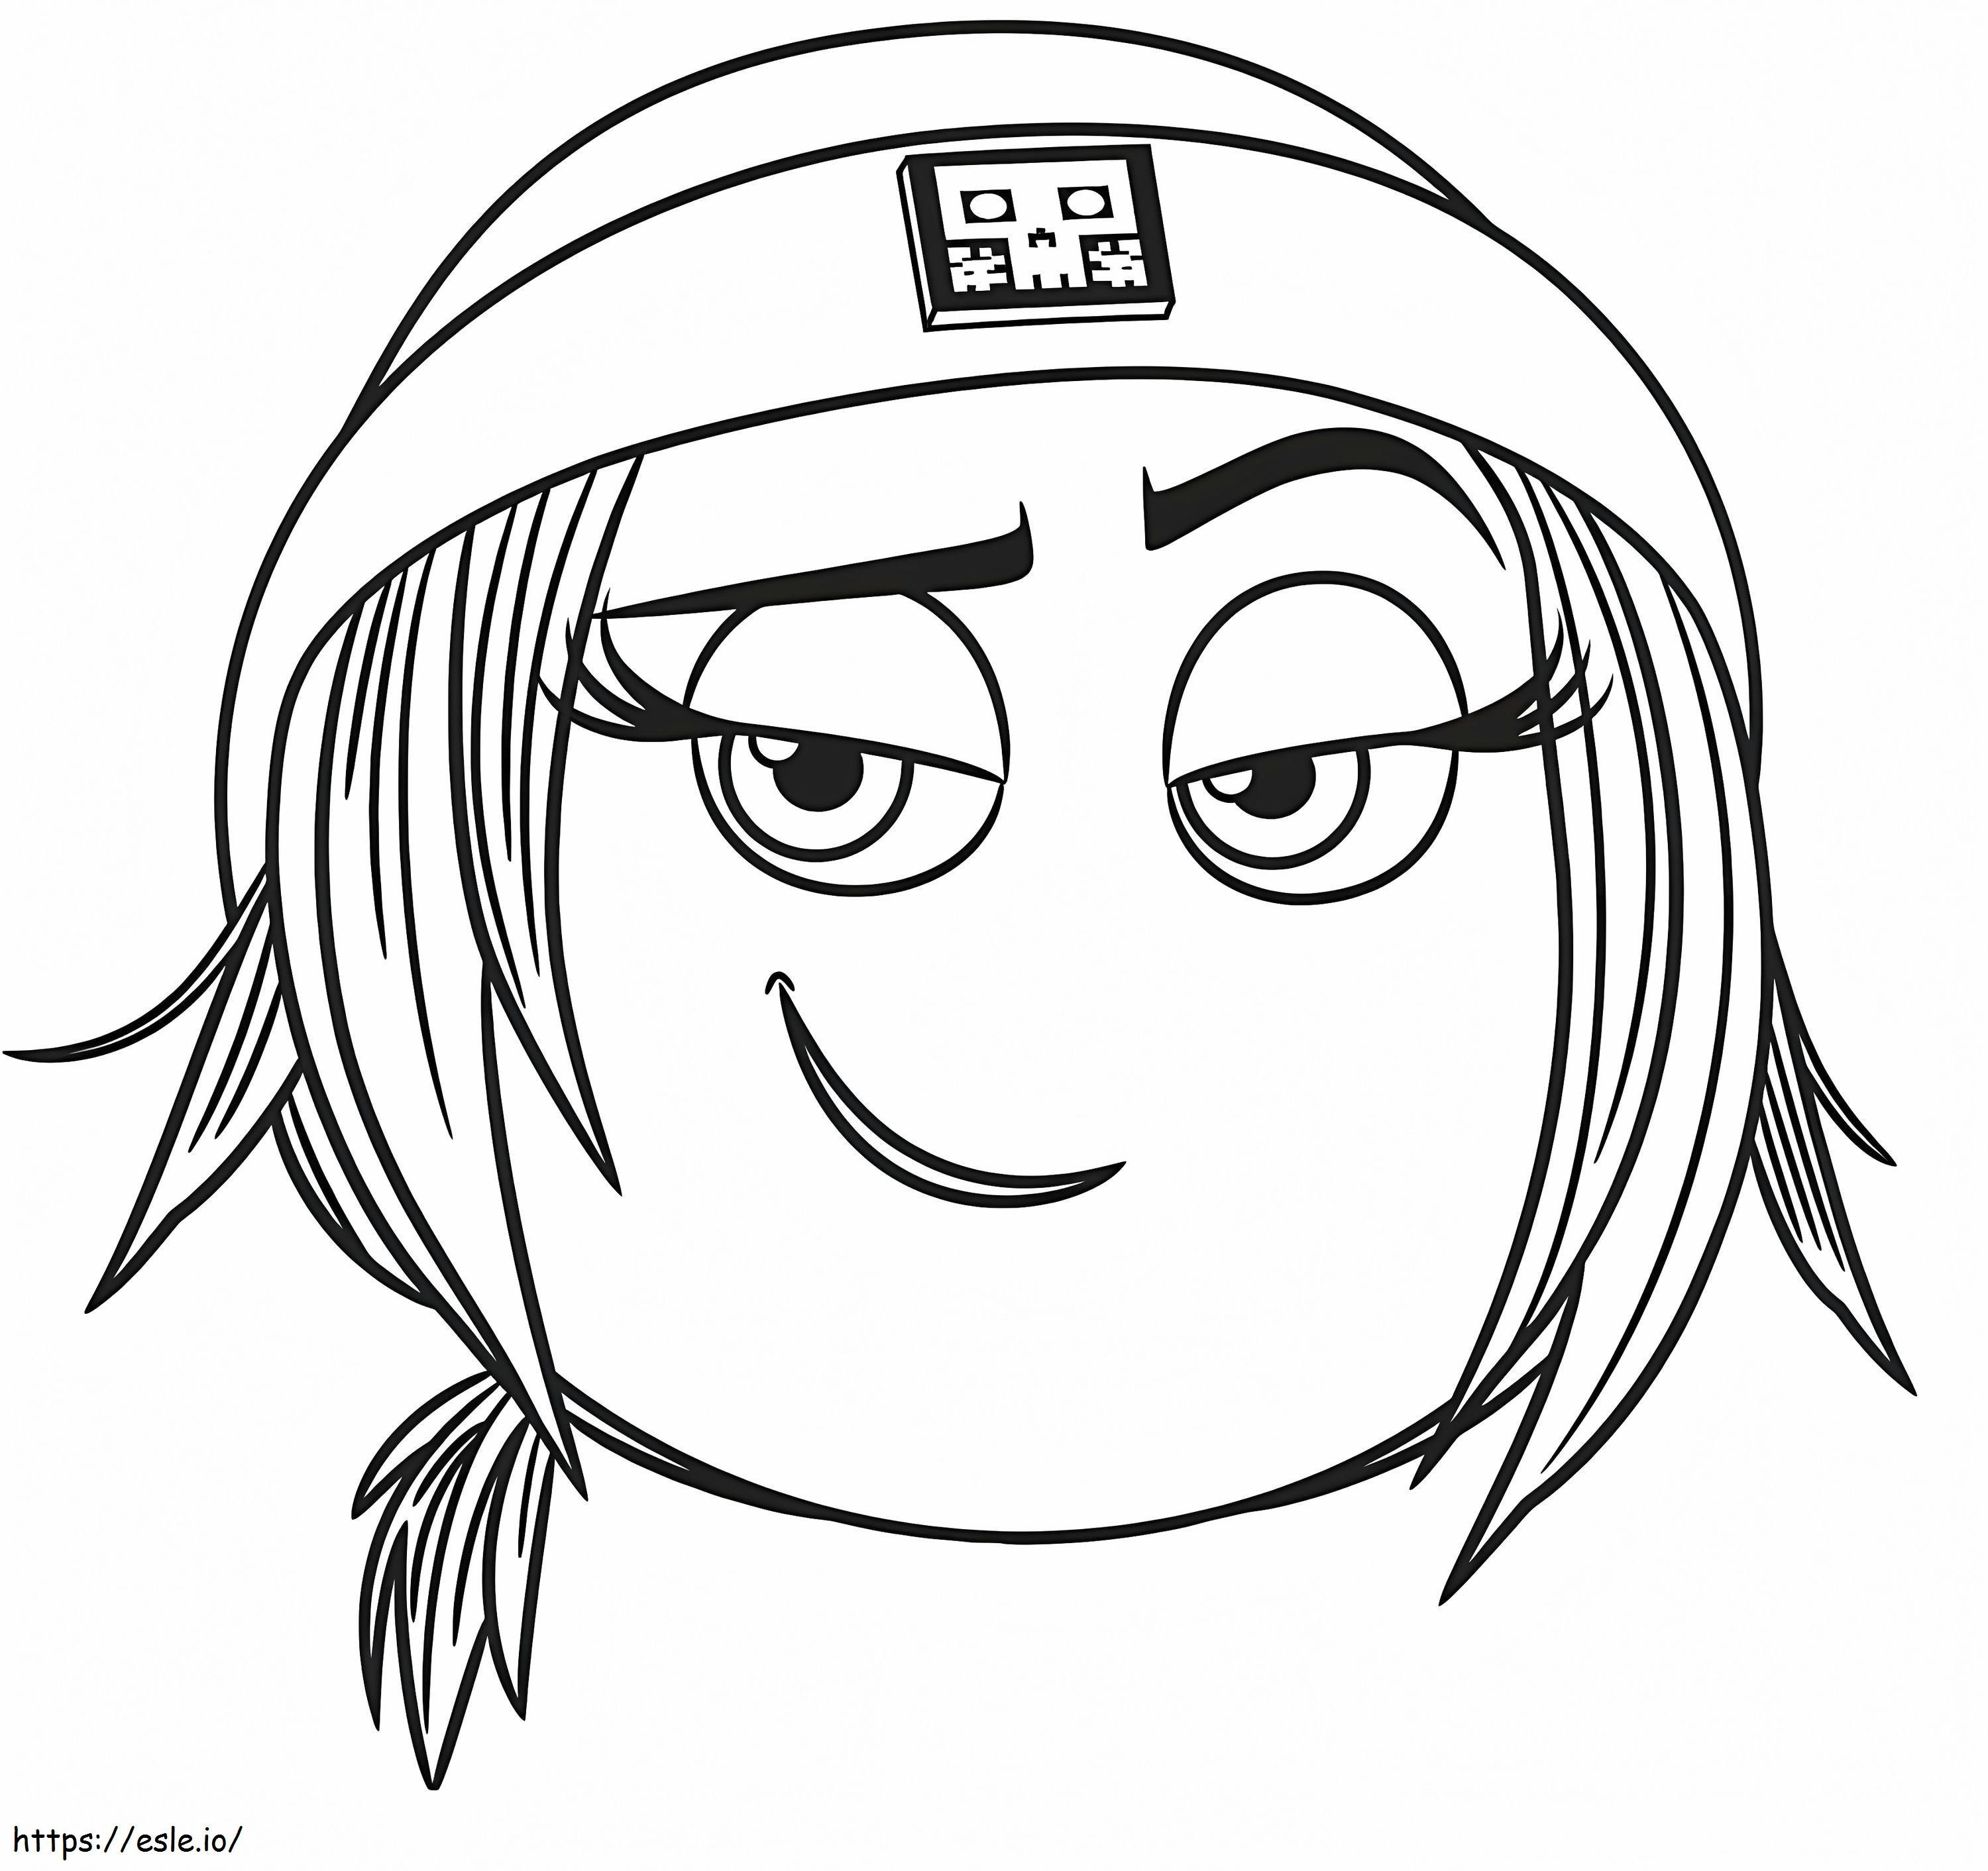 Jailbreak From The Emoji Movie coloring page